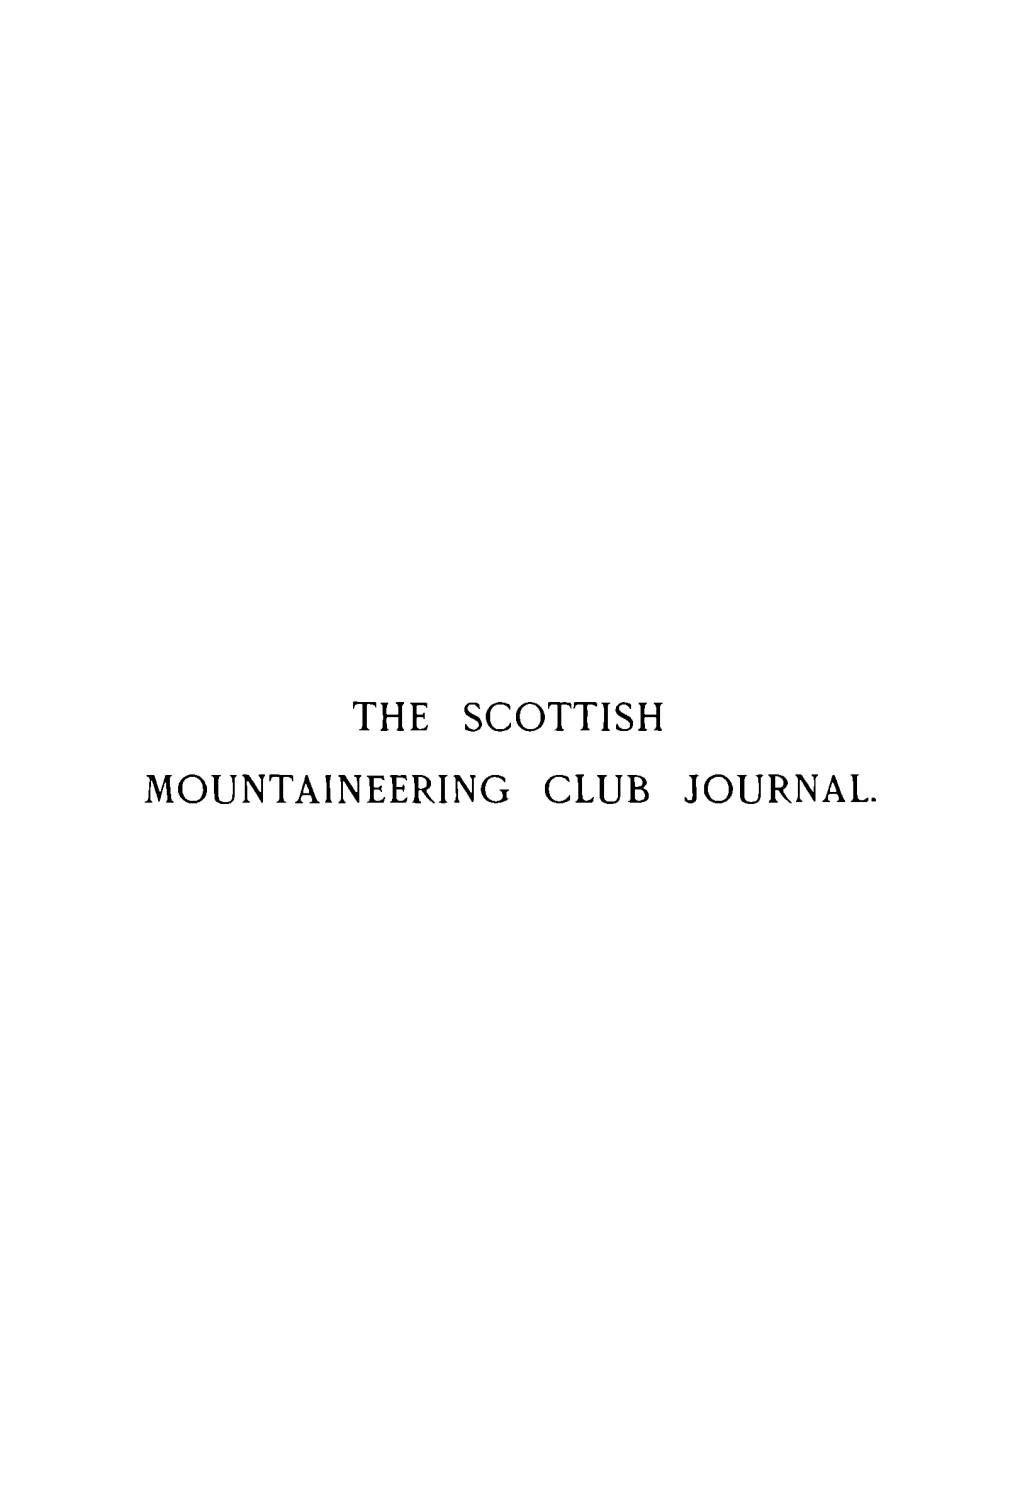 THE SCOTTISH MOUNTAINEERING CLUB JOURNAL the SCOTTISH Mountaineering C Lub J Ournal